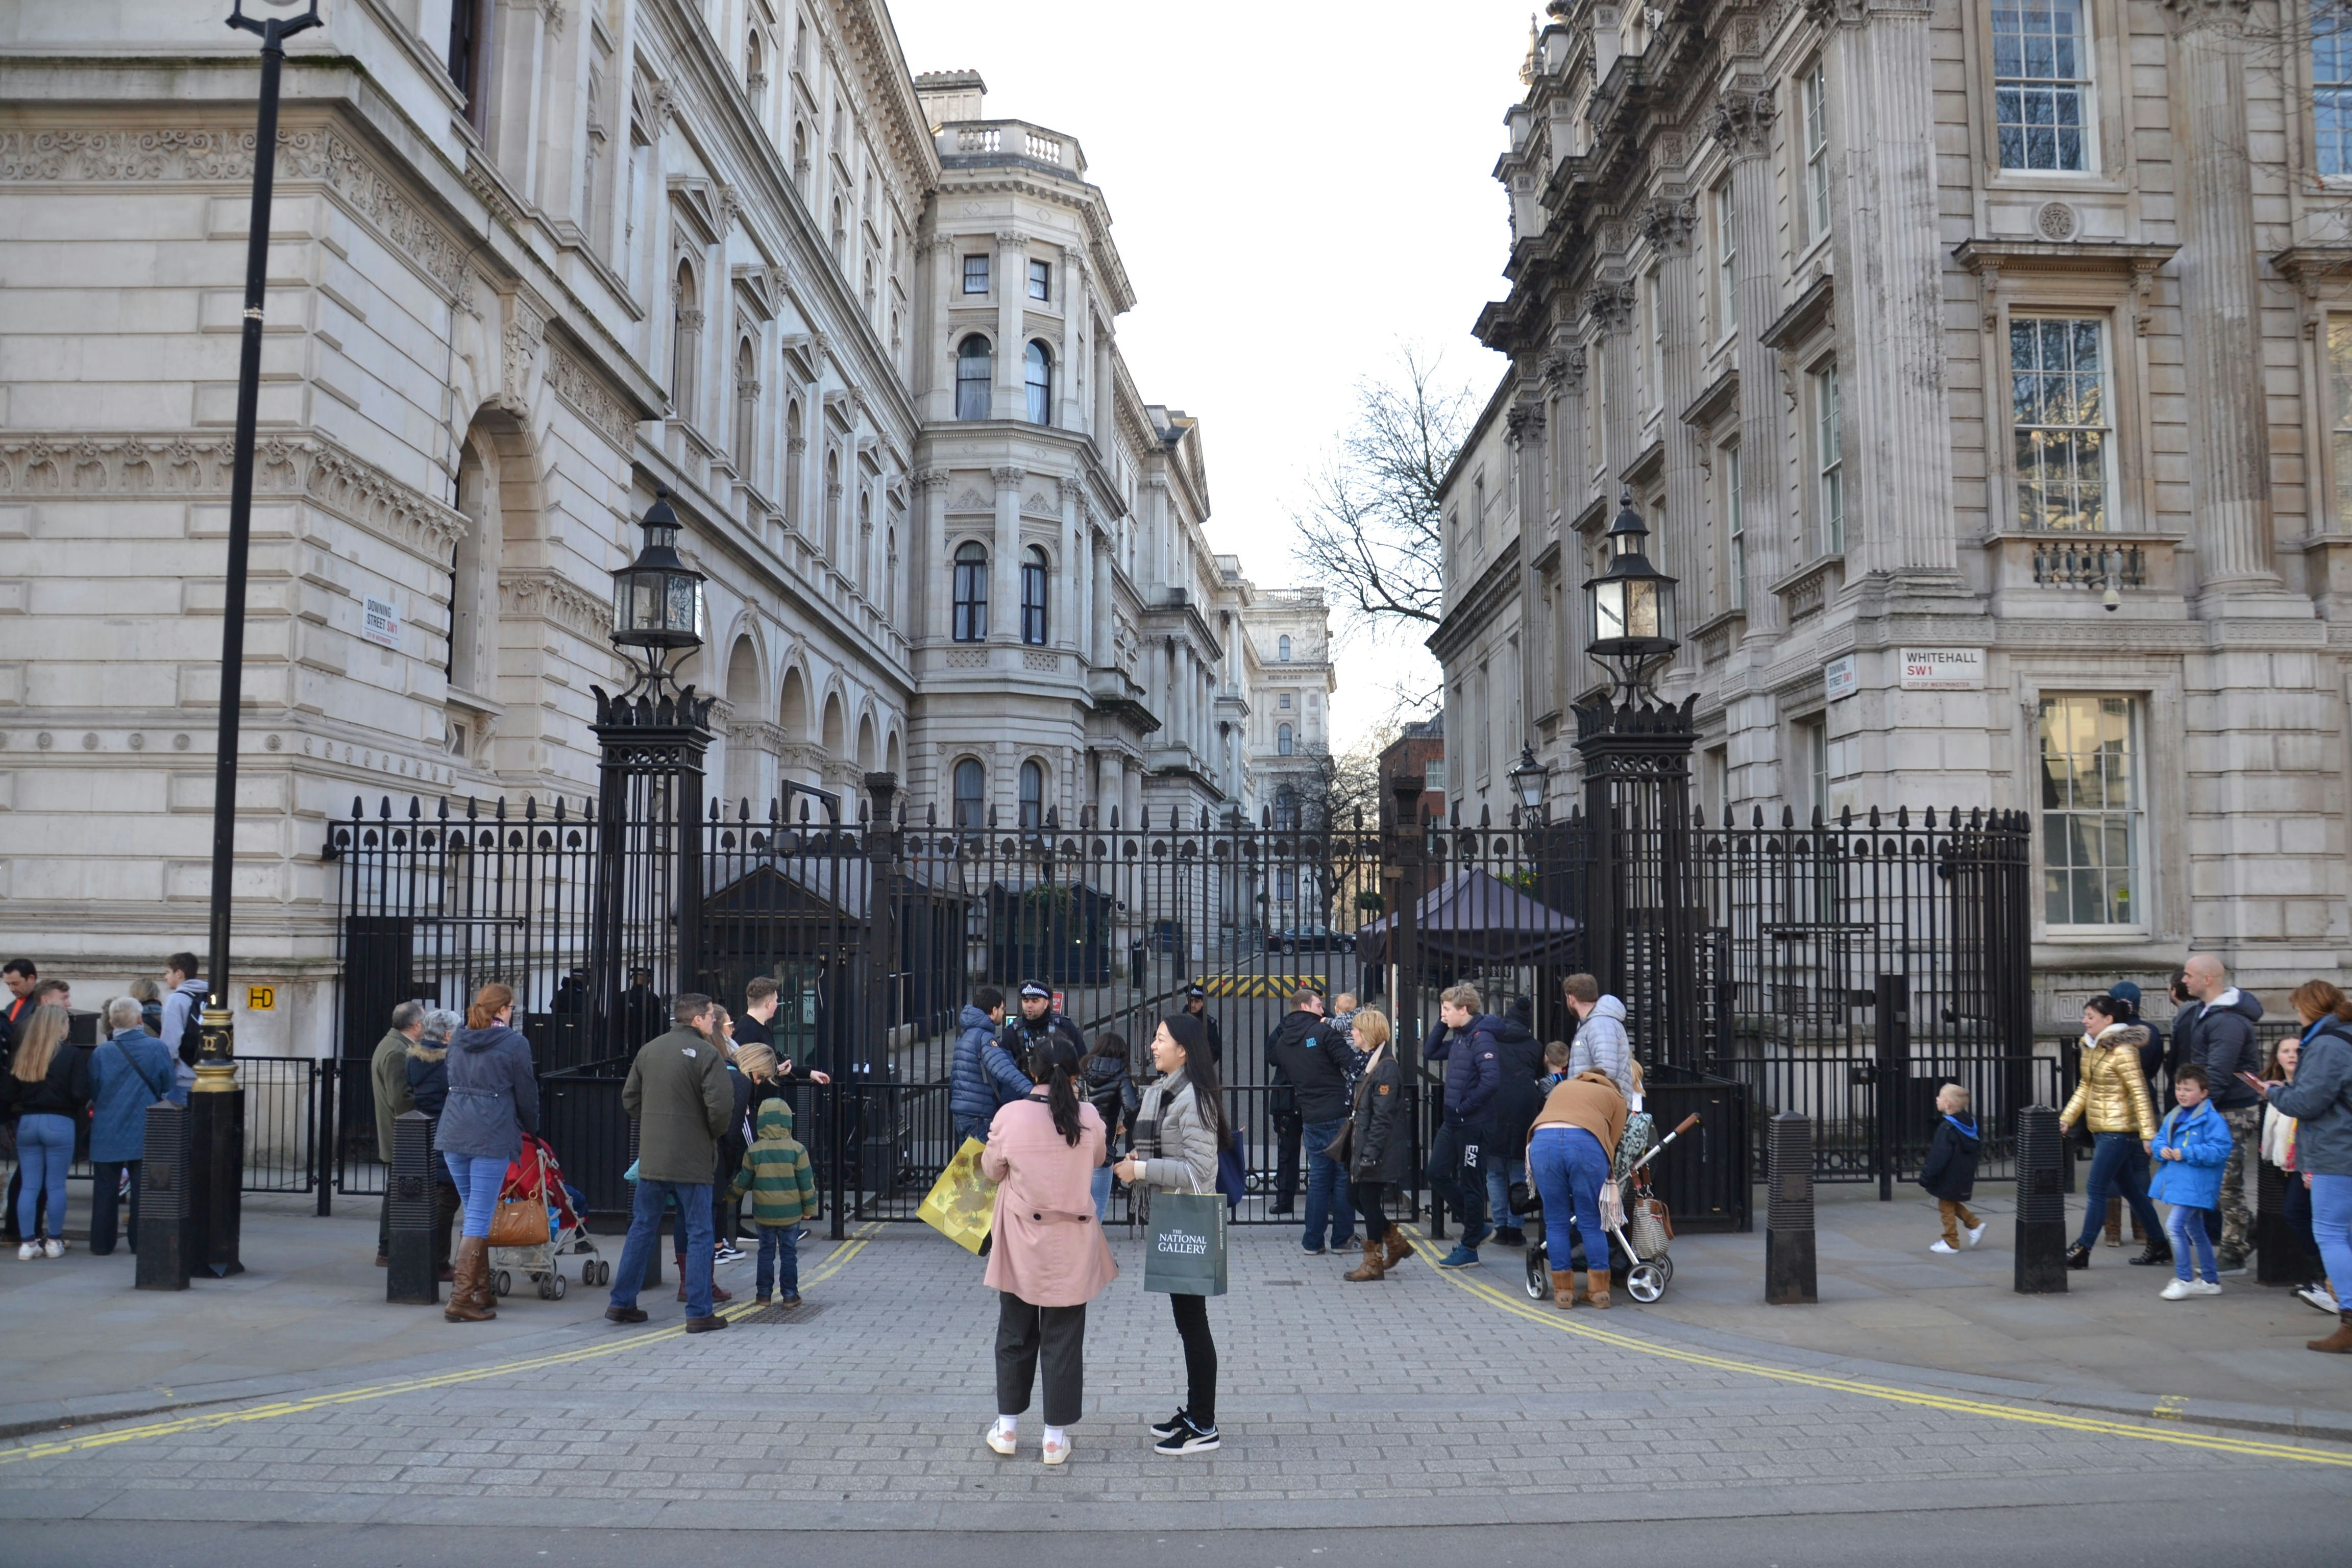 No 10 Downing Street, home of the Prime Minster.